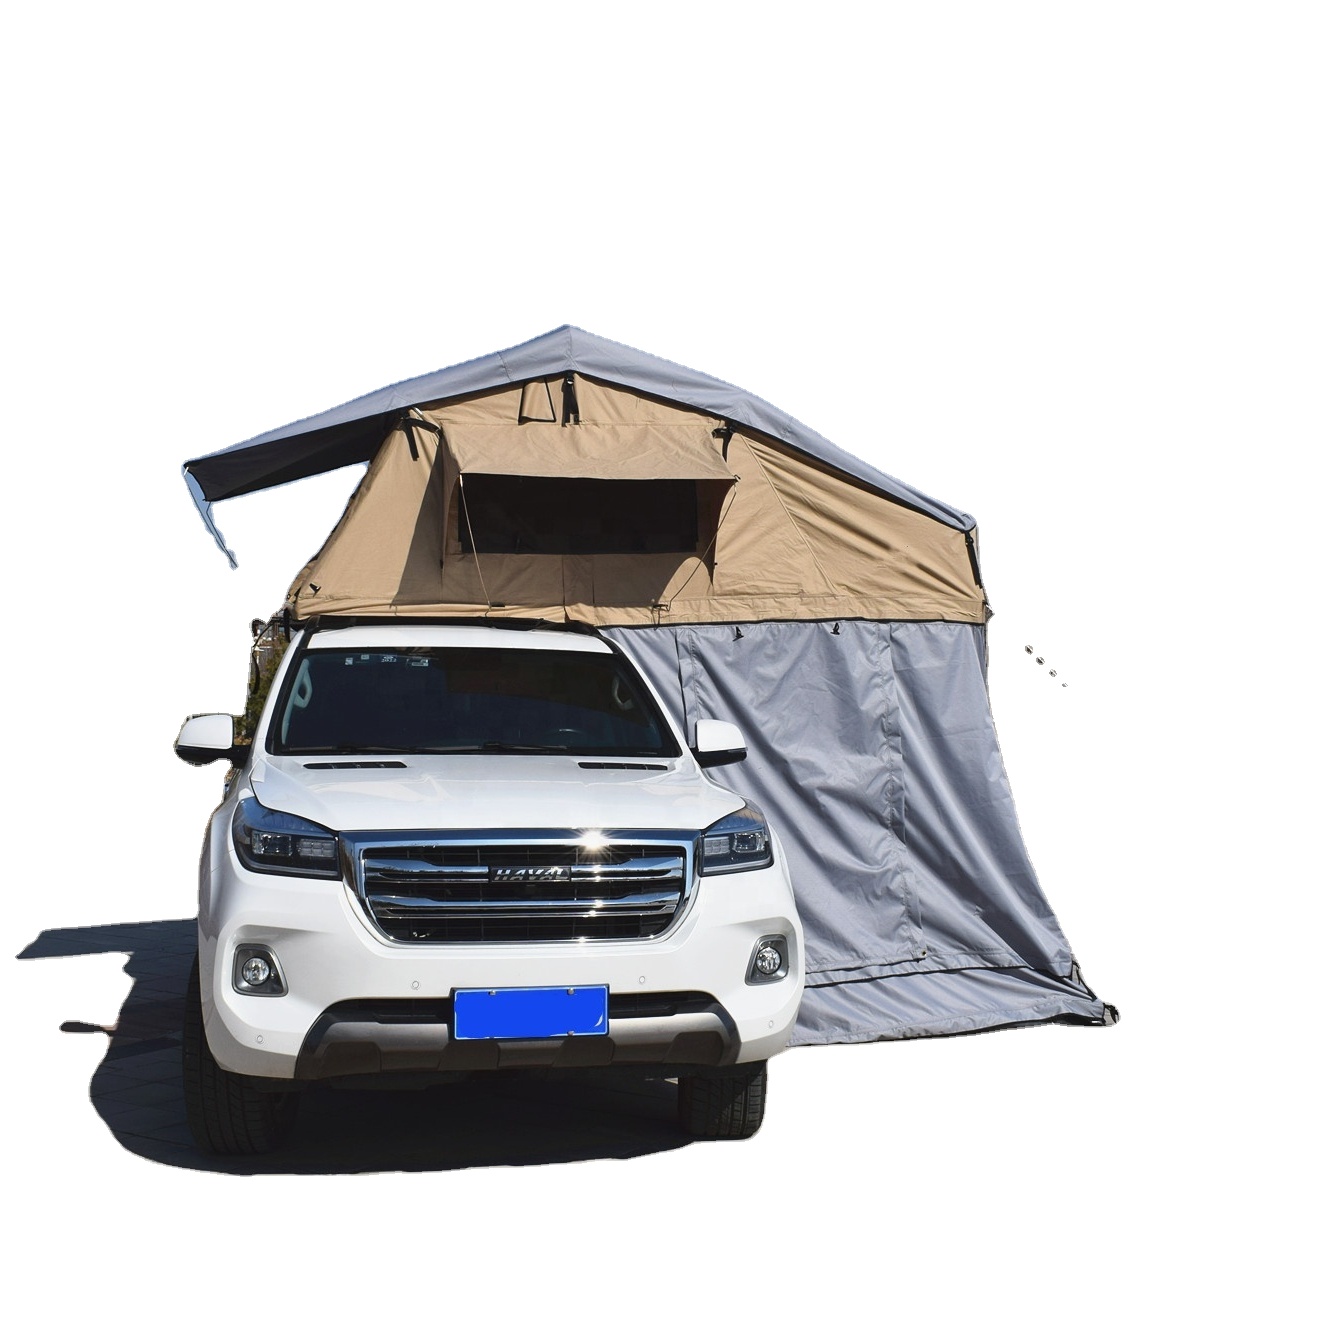 Rooftop tents are far less impractical than you might think